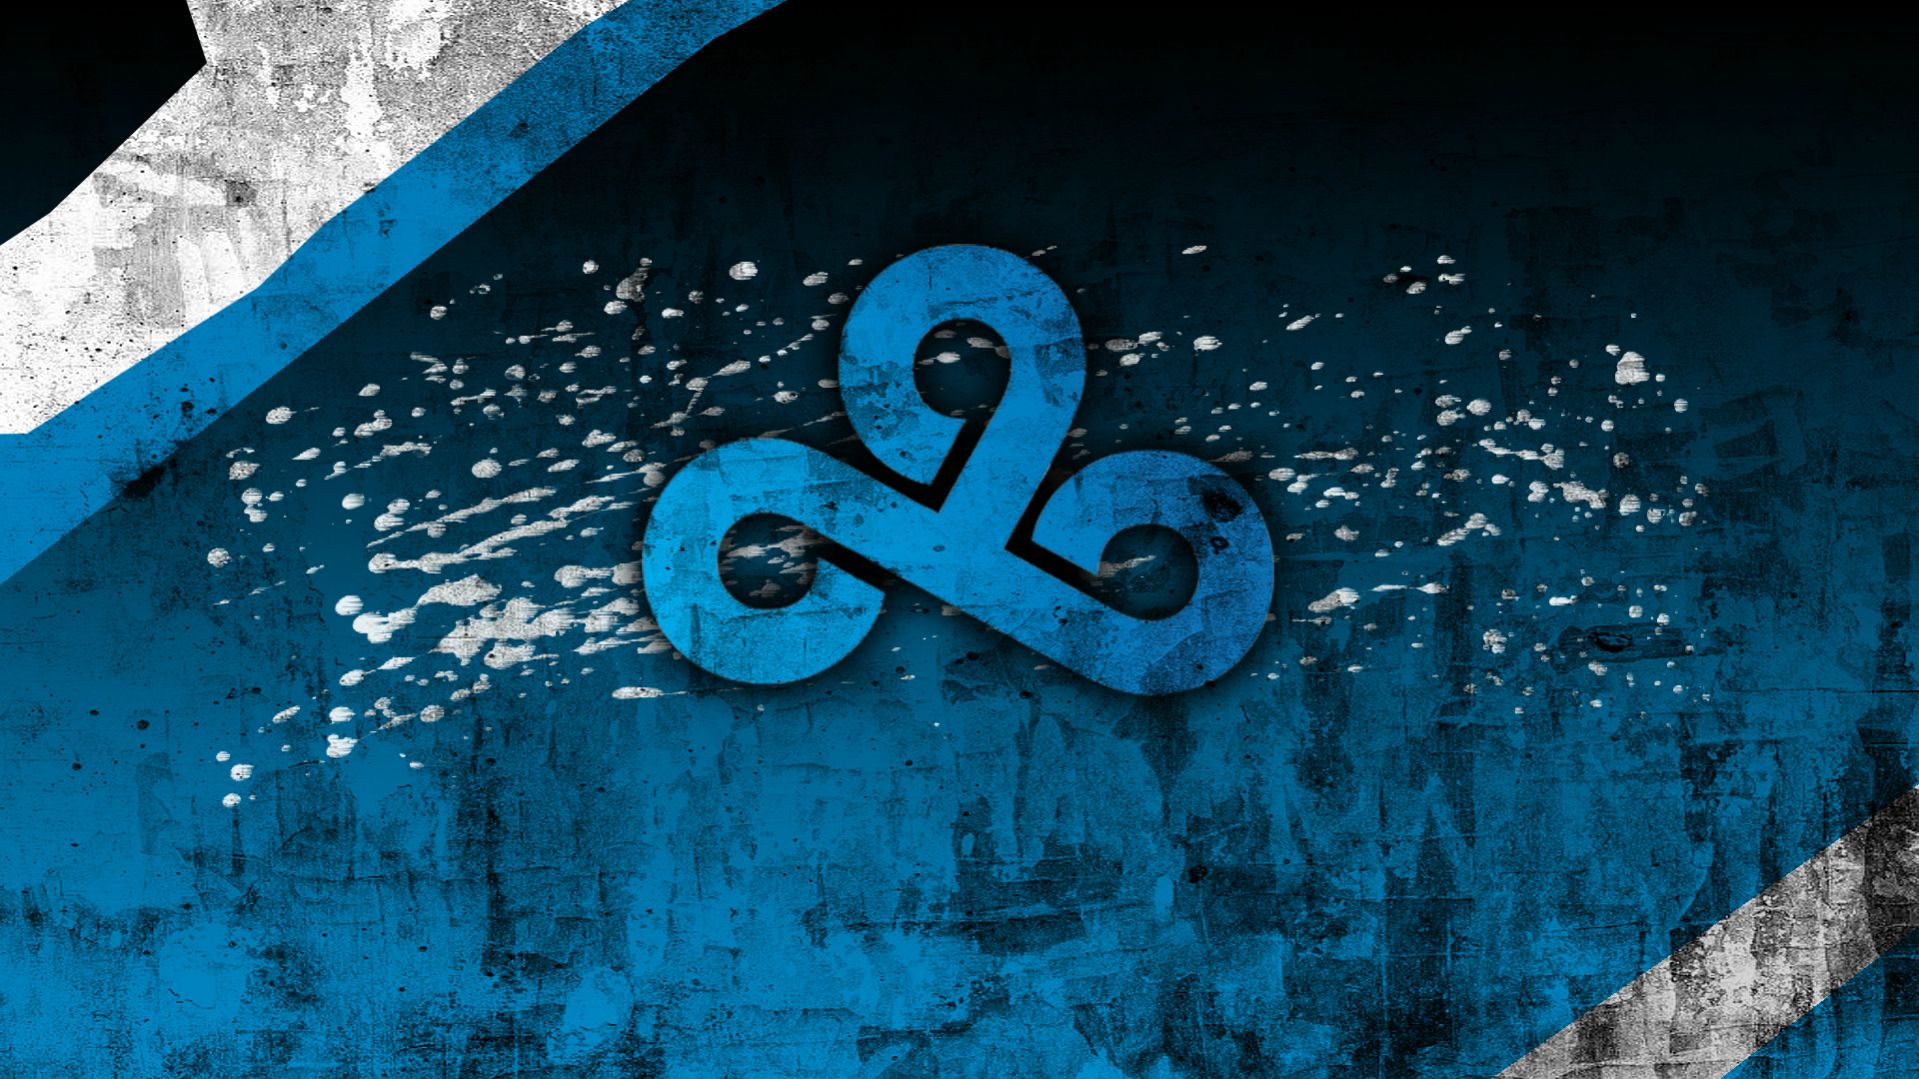 Showing The Photos Of Cloud9 Wallpaper